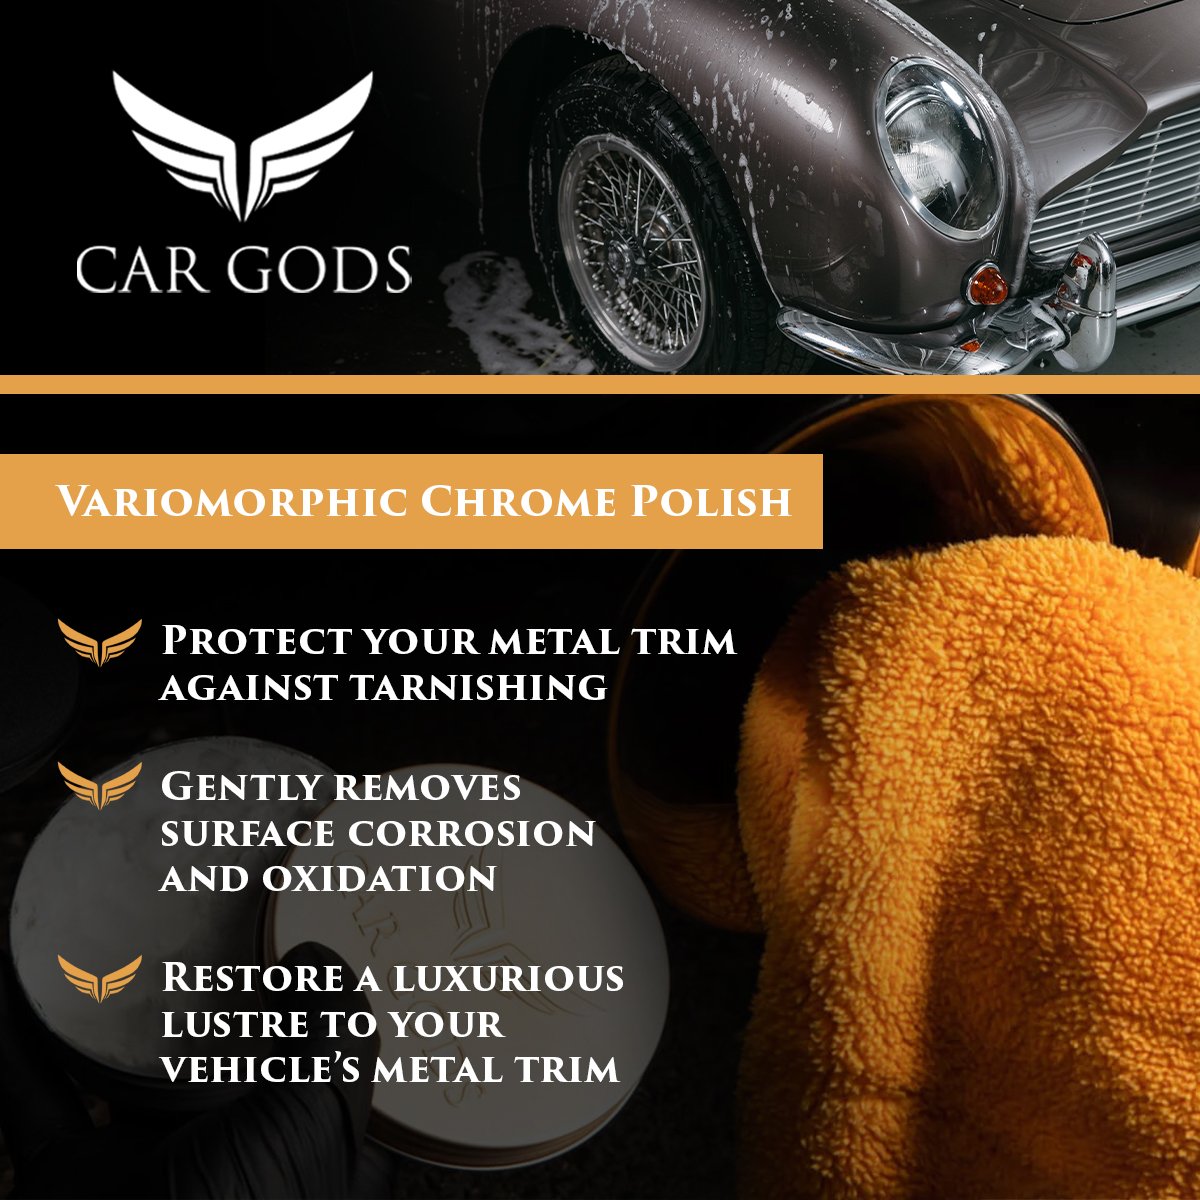 Car Gods Variomorphic Chrome Polish Restore your vehicle’s metal trim and protect it against tarnishing. Active ingredients gently clean a variety of metals and remove surface corrosion and oxidation.